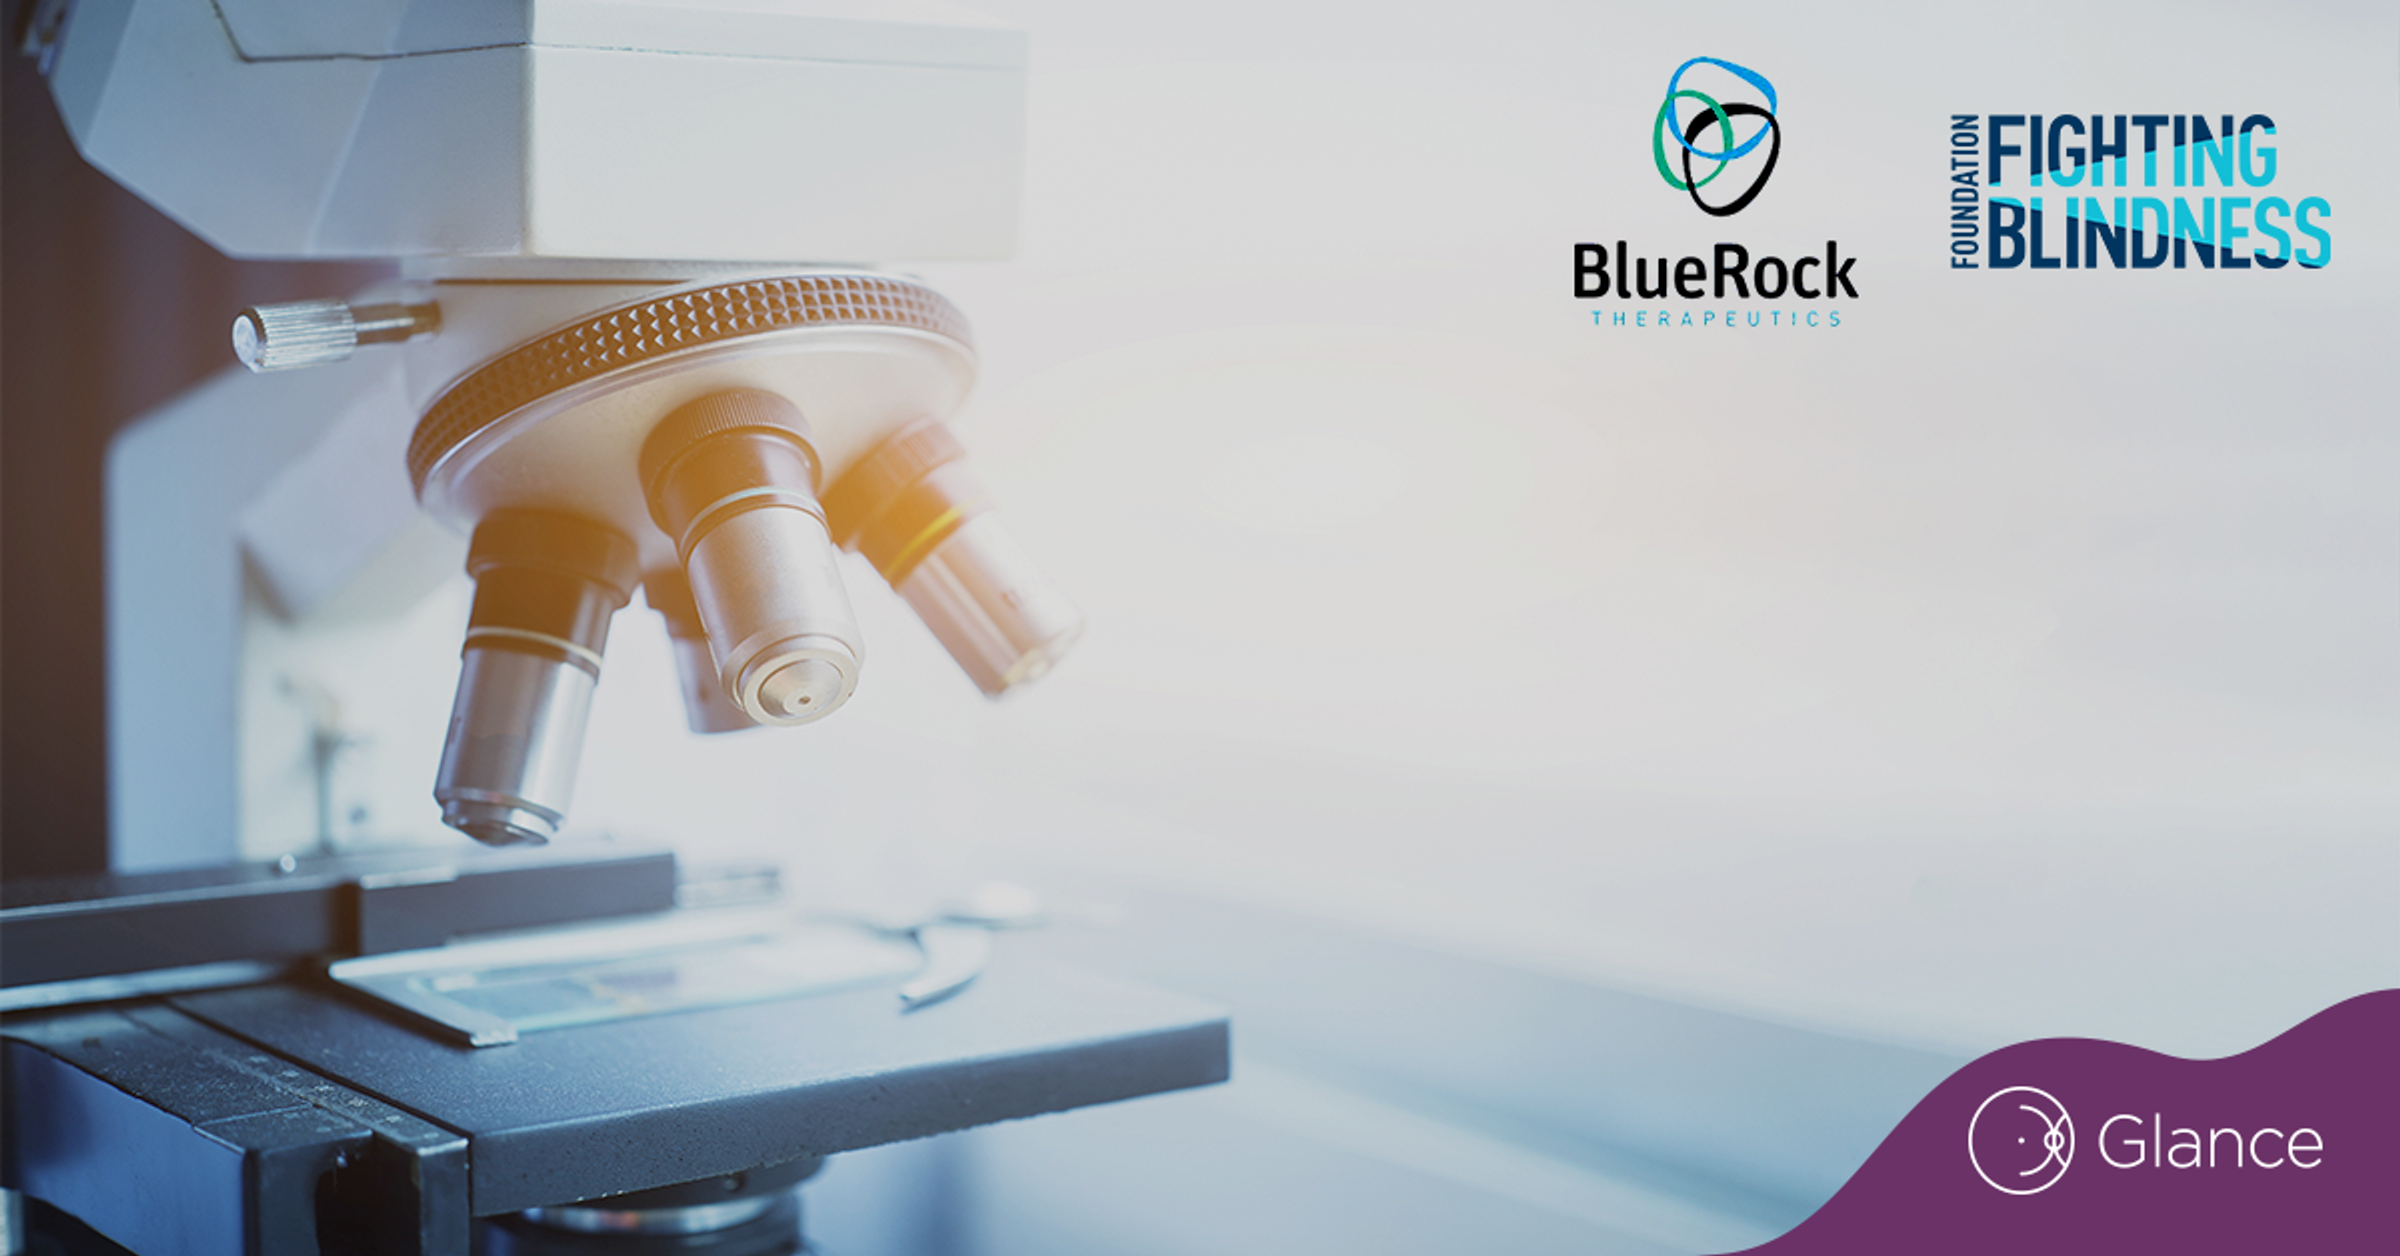 Foundation Fighting Blindness partners with BlueRock Therapeutics on IRD study